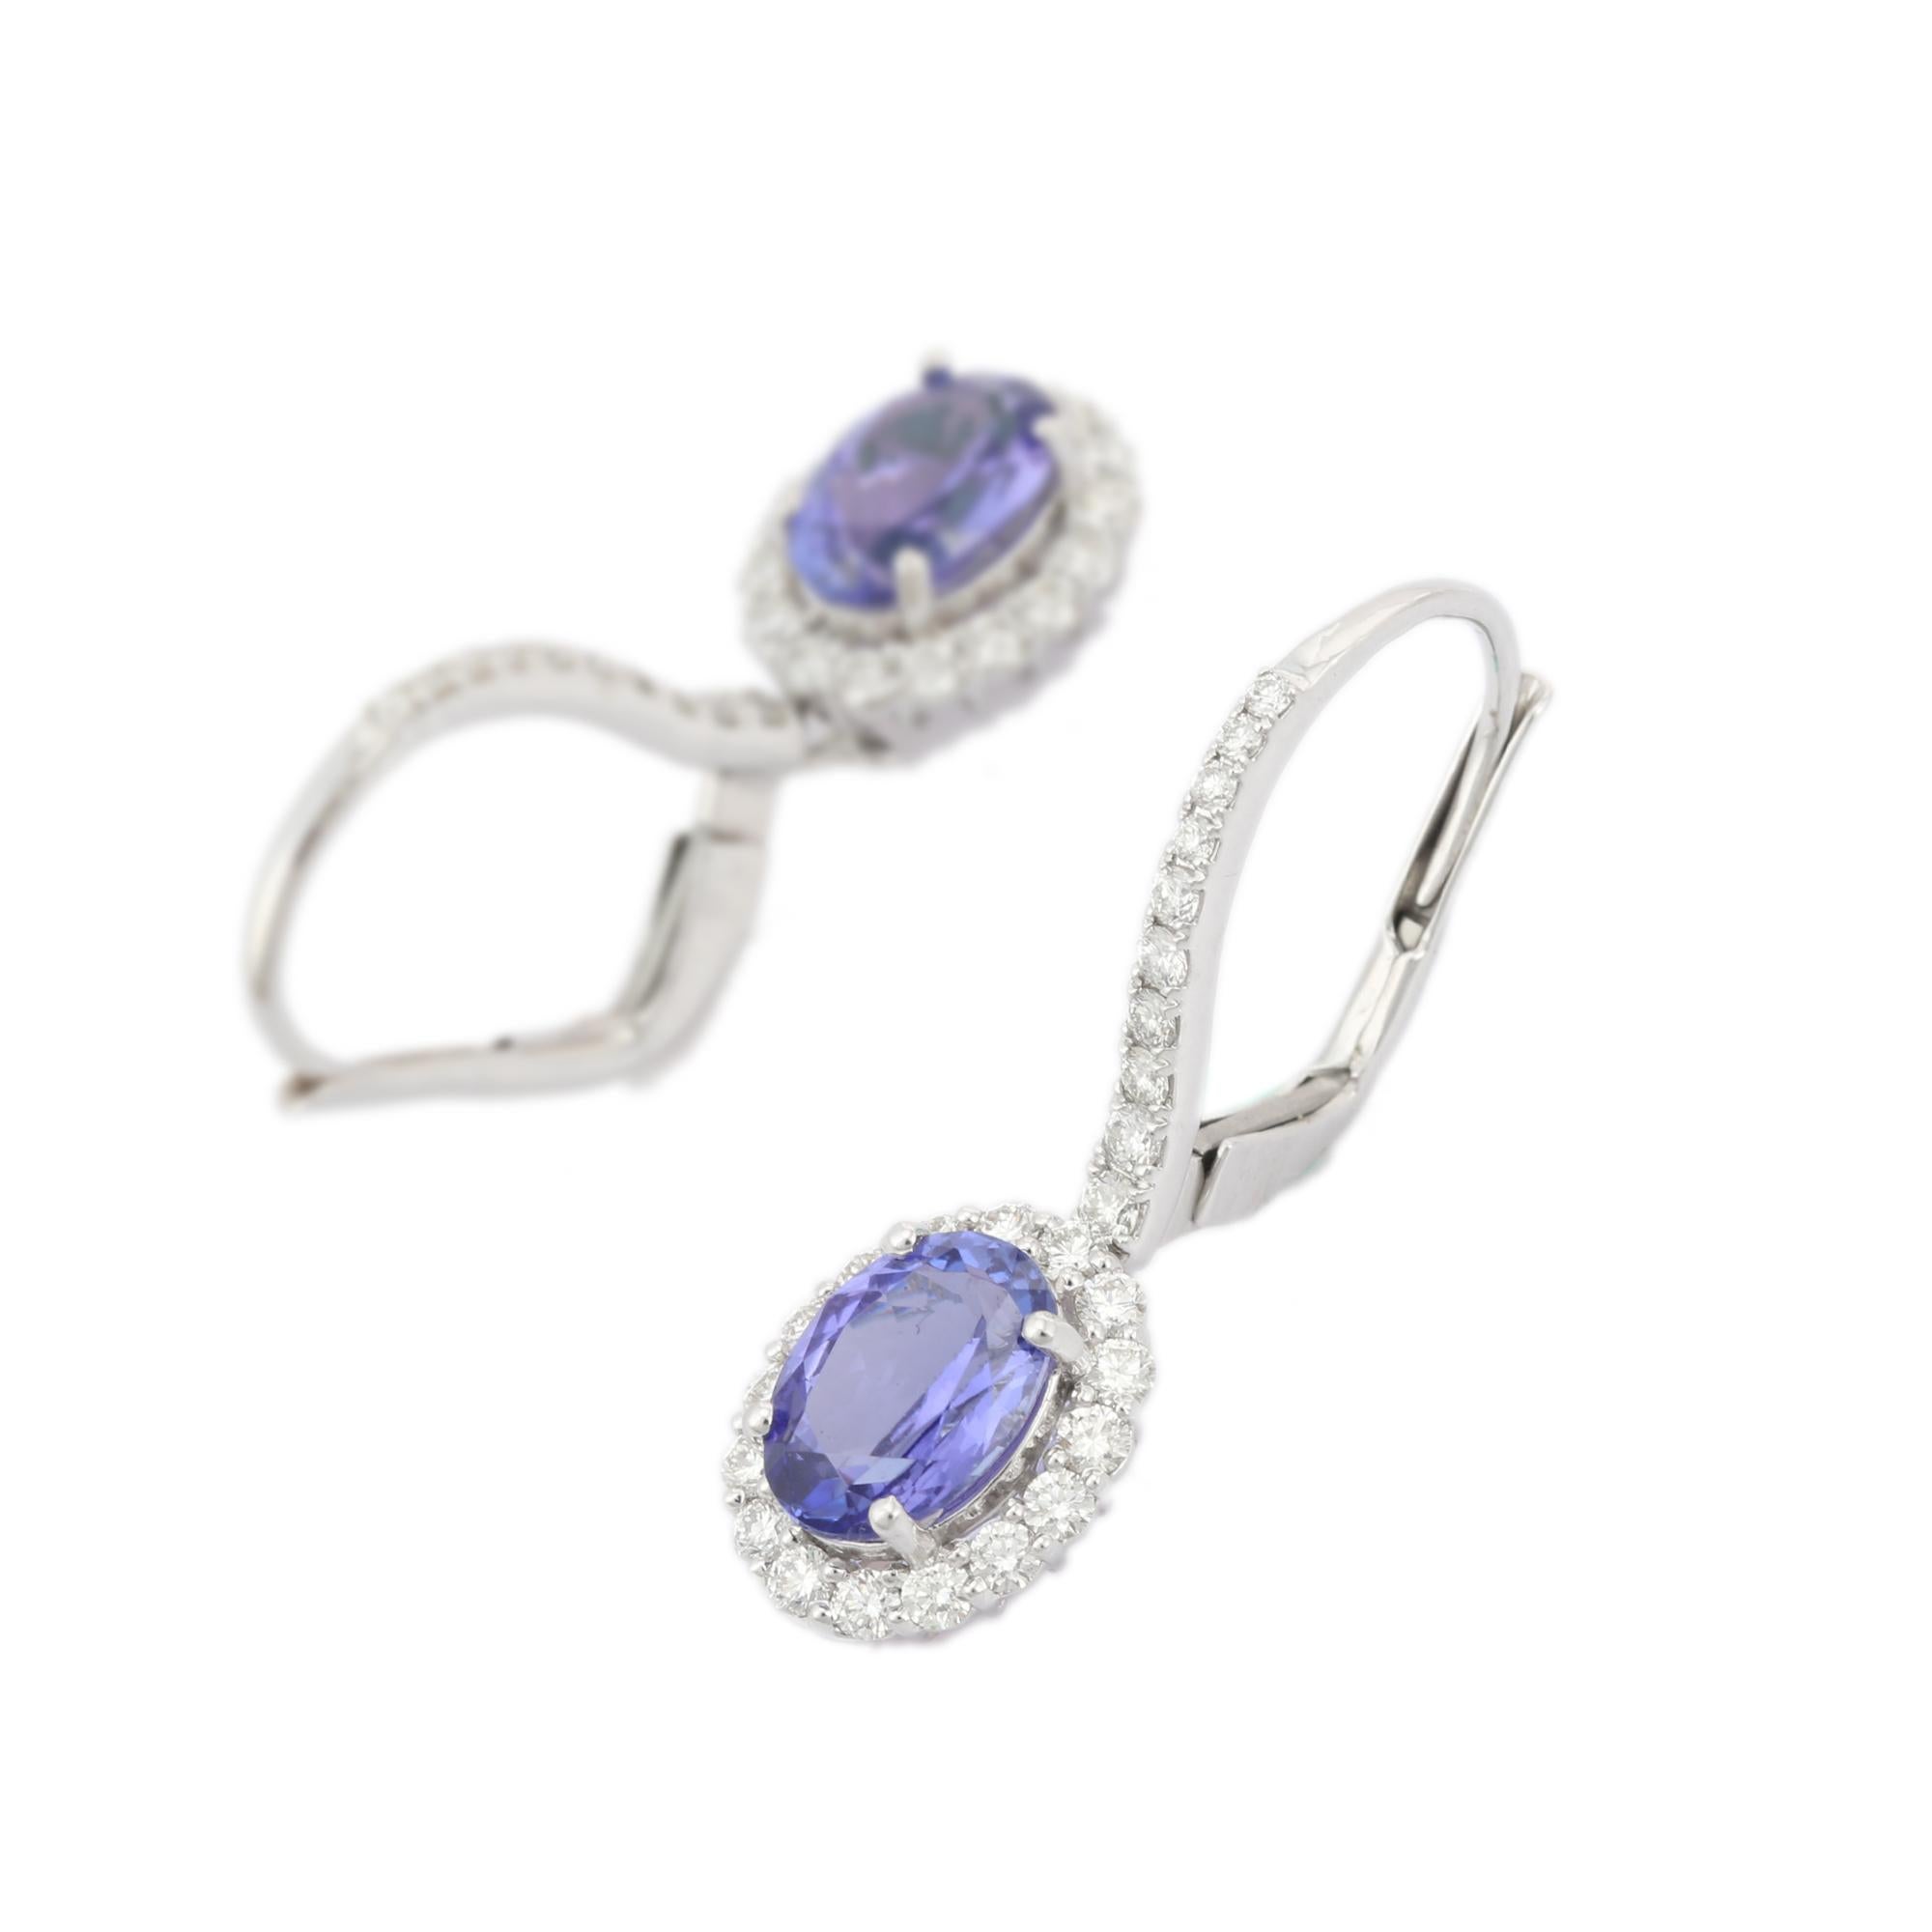 You shall need Tanzanite Dangle earrings to make a statement with your look. These earrings create a sparkling, luxurious look featuring oval cut gemstone.
If you love to gravitate towards unique styles, this piece of jewelry is perfect for you.